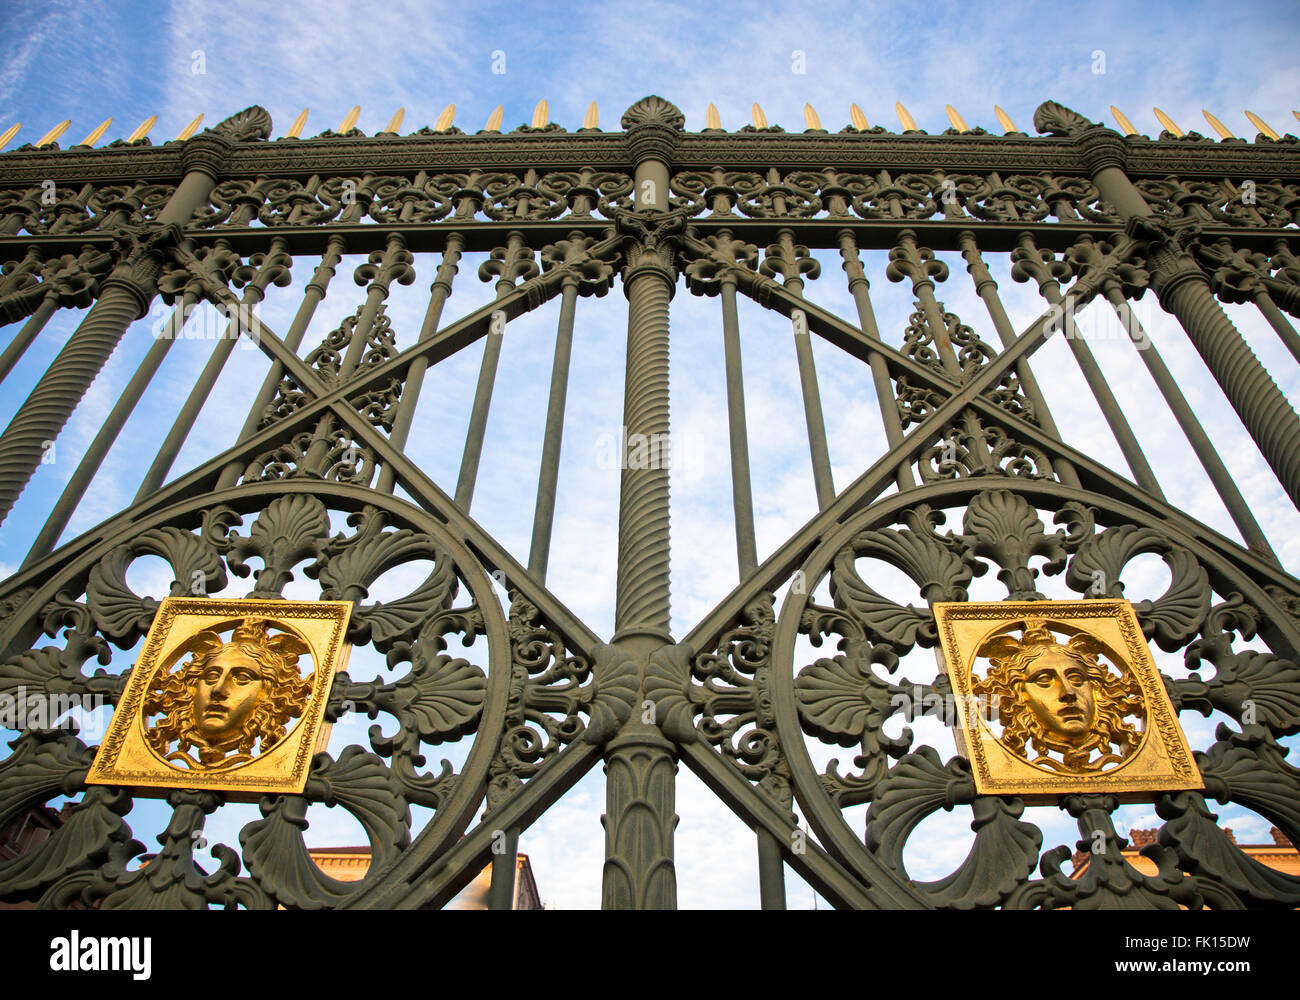 Italy - Detail of the original gate  at the entrance of the Turin Royal Palace Stock Photo